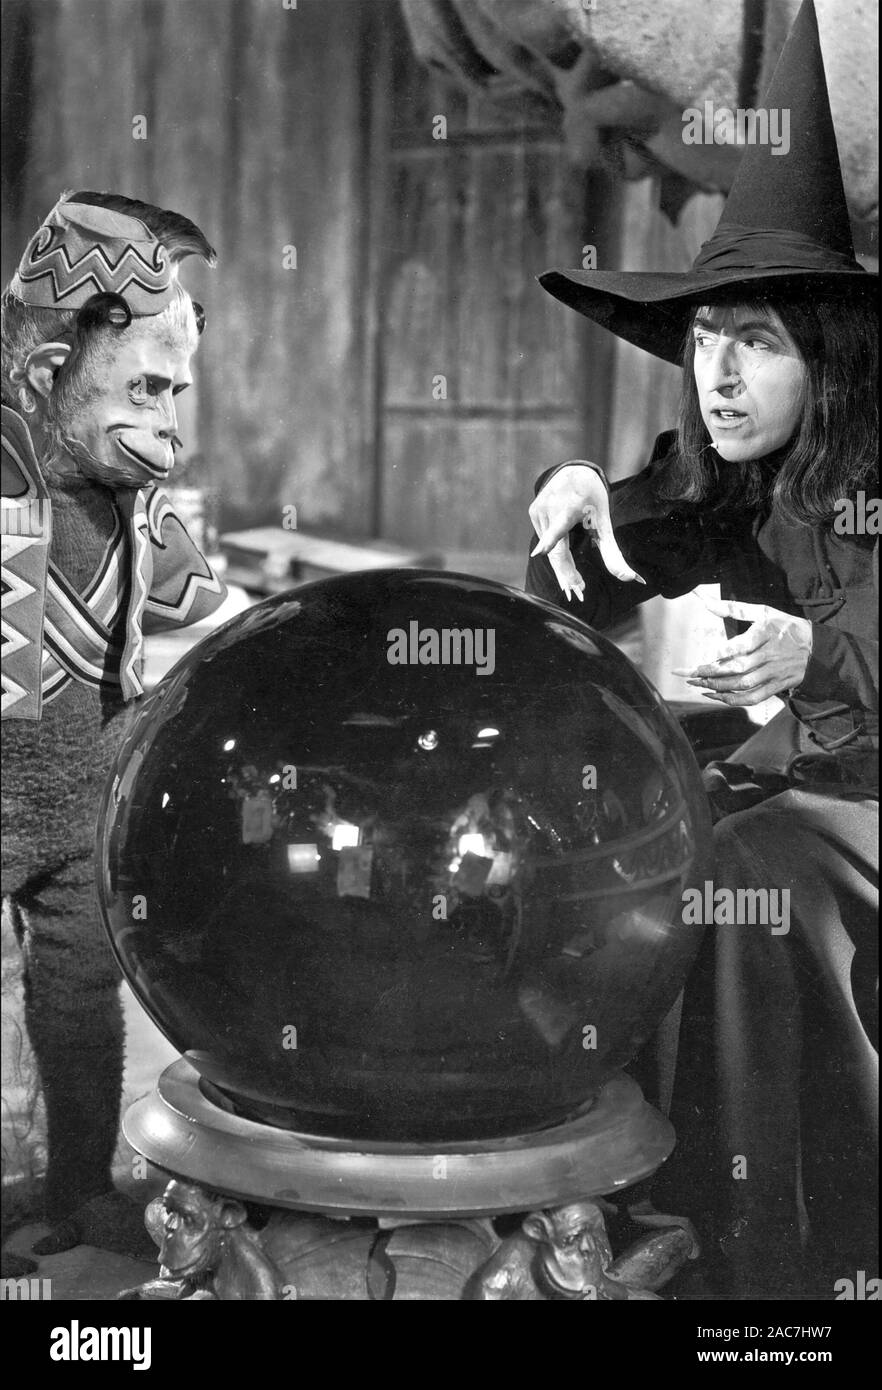 THE WIZARD OF OZ 1939 MGM film with Margaret Hamilton as the Wicked Witch of the West Stock Photo